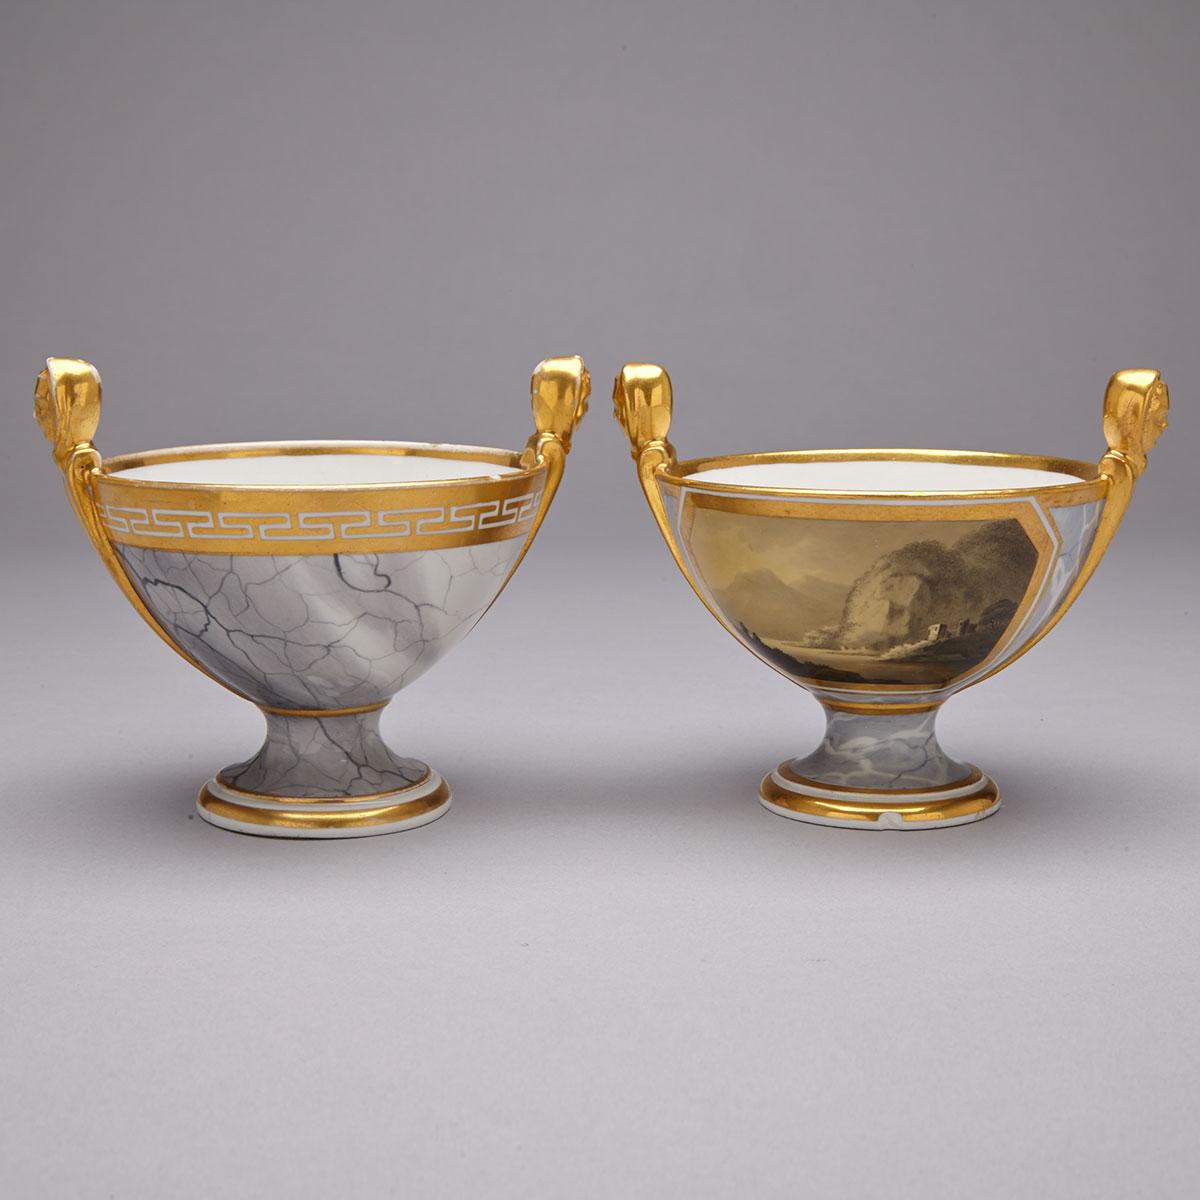 Two Barr, Flight & Barr Worcester Grey Marbled Ground Two-Handled Vases, c.1804-13